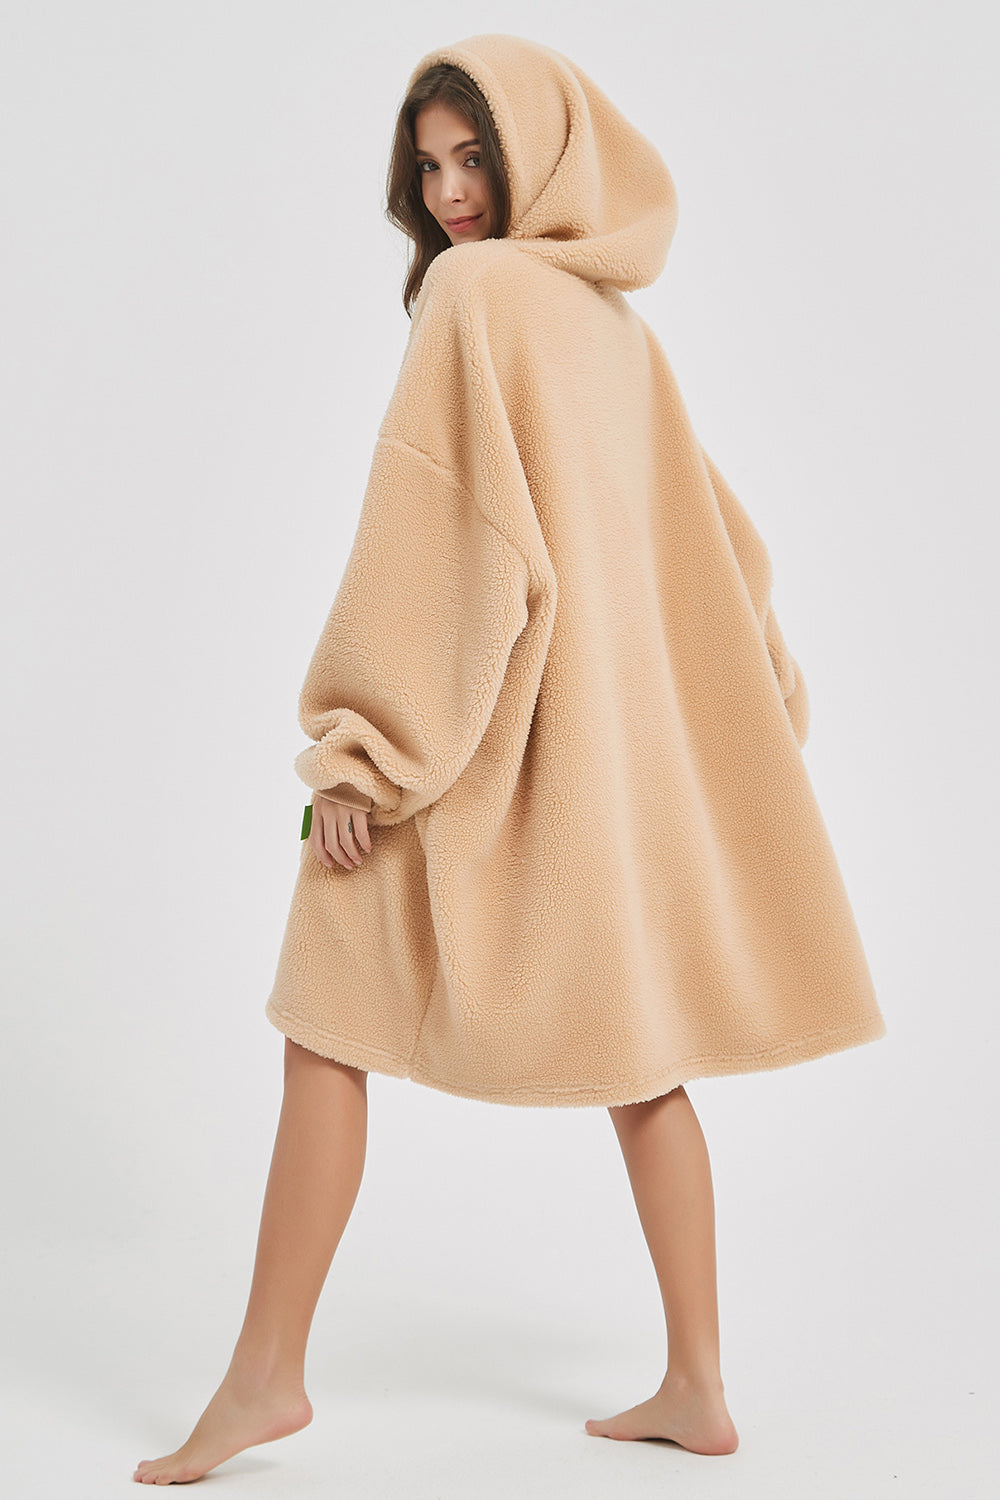 Lantern Sleeve Oversized Hooded Fuzzy Lounge Dress - Tophatter Deals and Online Shopping - Electronics, Jewelry, Beauty, Health, Gadgets, Fashion - Tophatter's Discounts & Offers - tophatters - tophatters.co